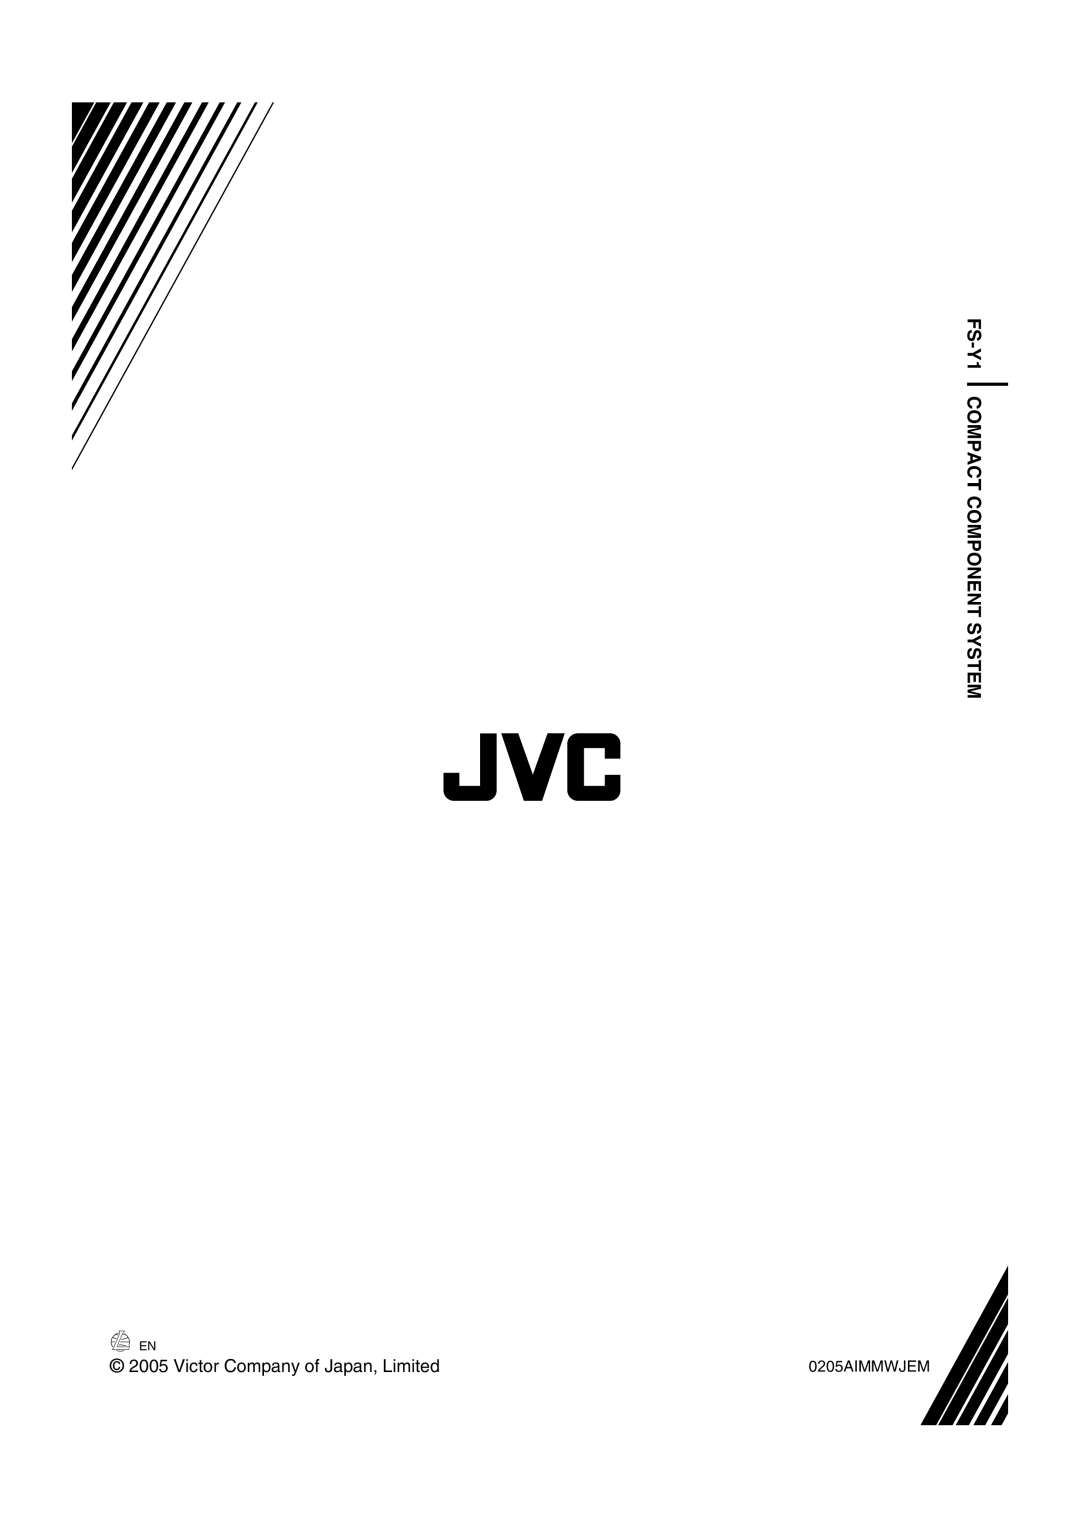 JVC GVT0142-001A manual FS-Y1COMPACT COMPONENT SYSTEM, c 2005 Victor Company of Japan, Limited 